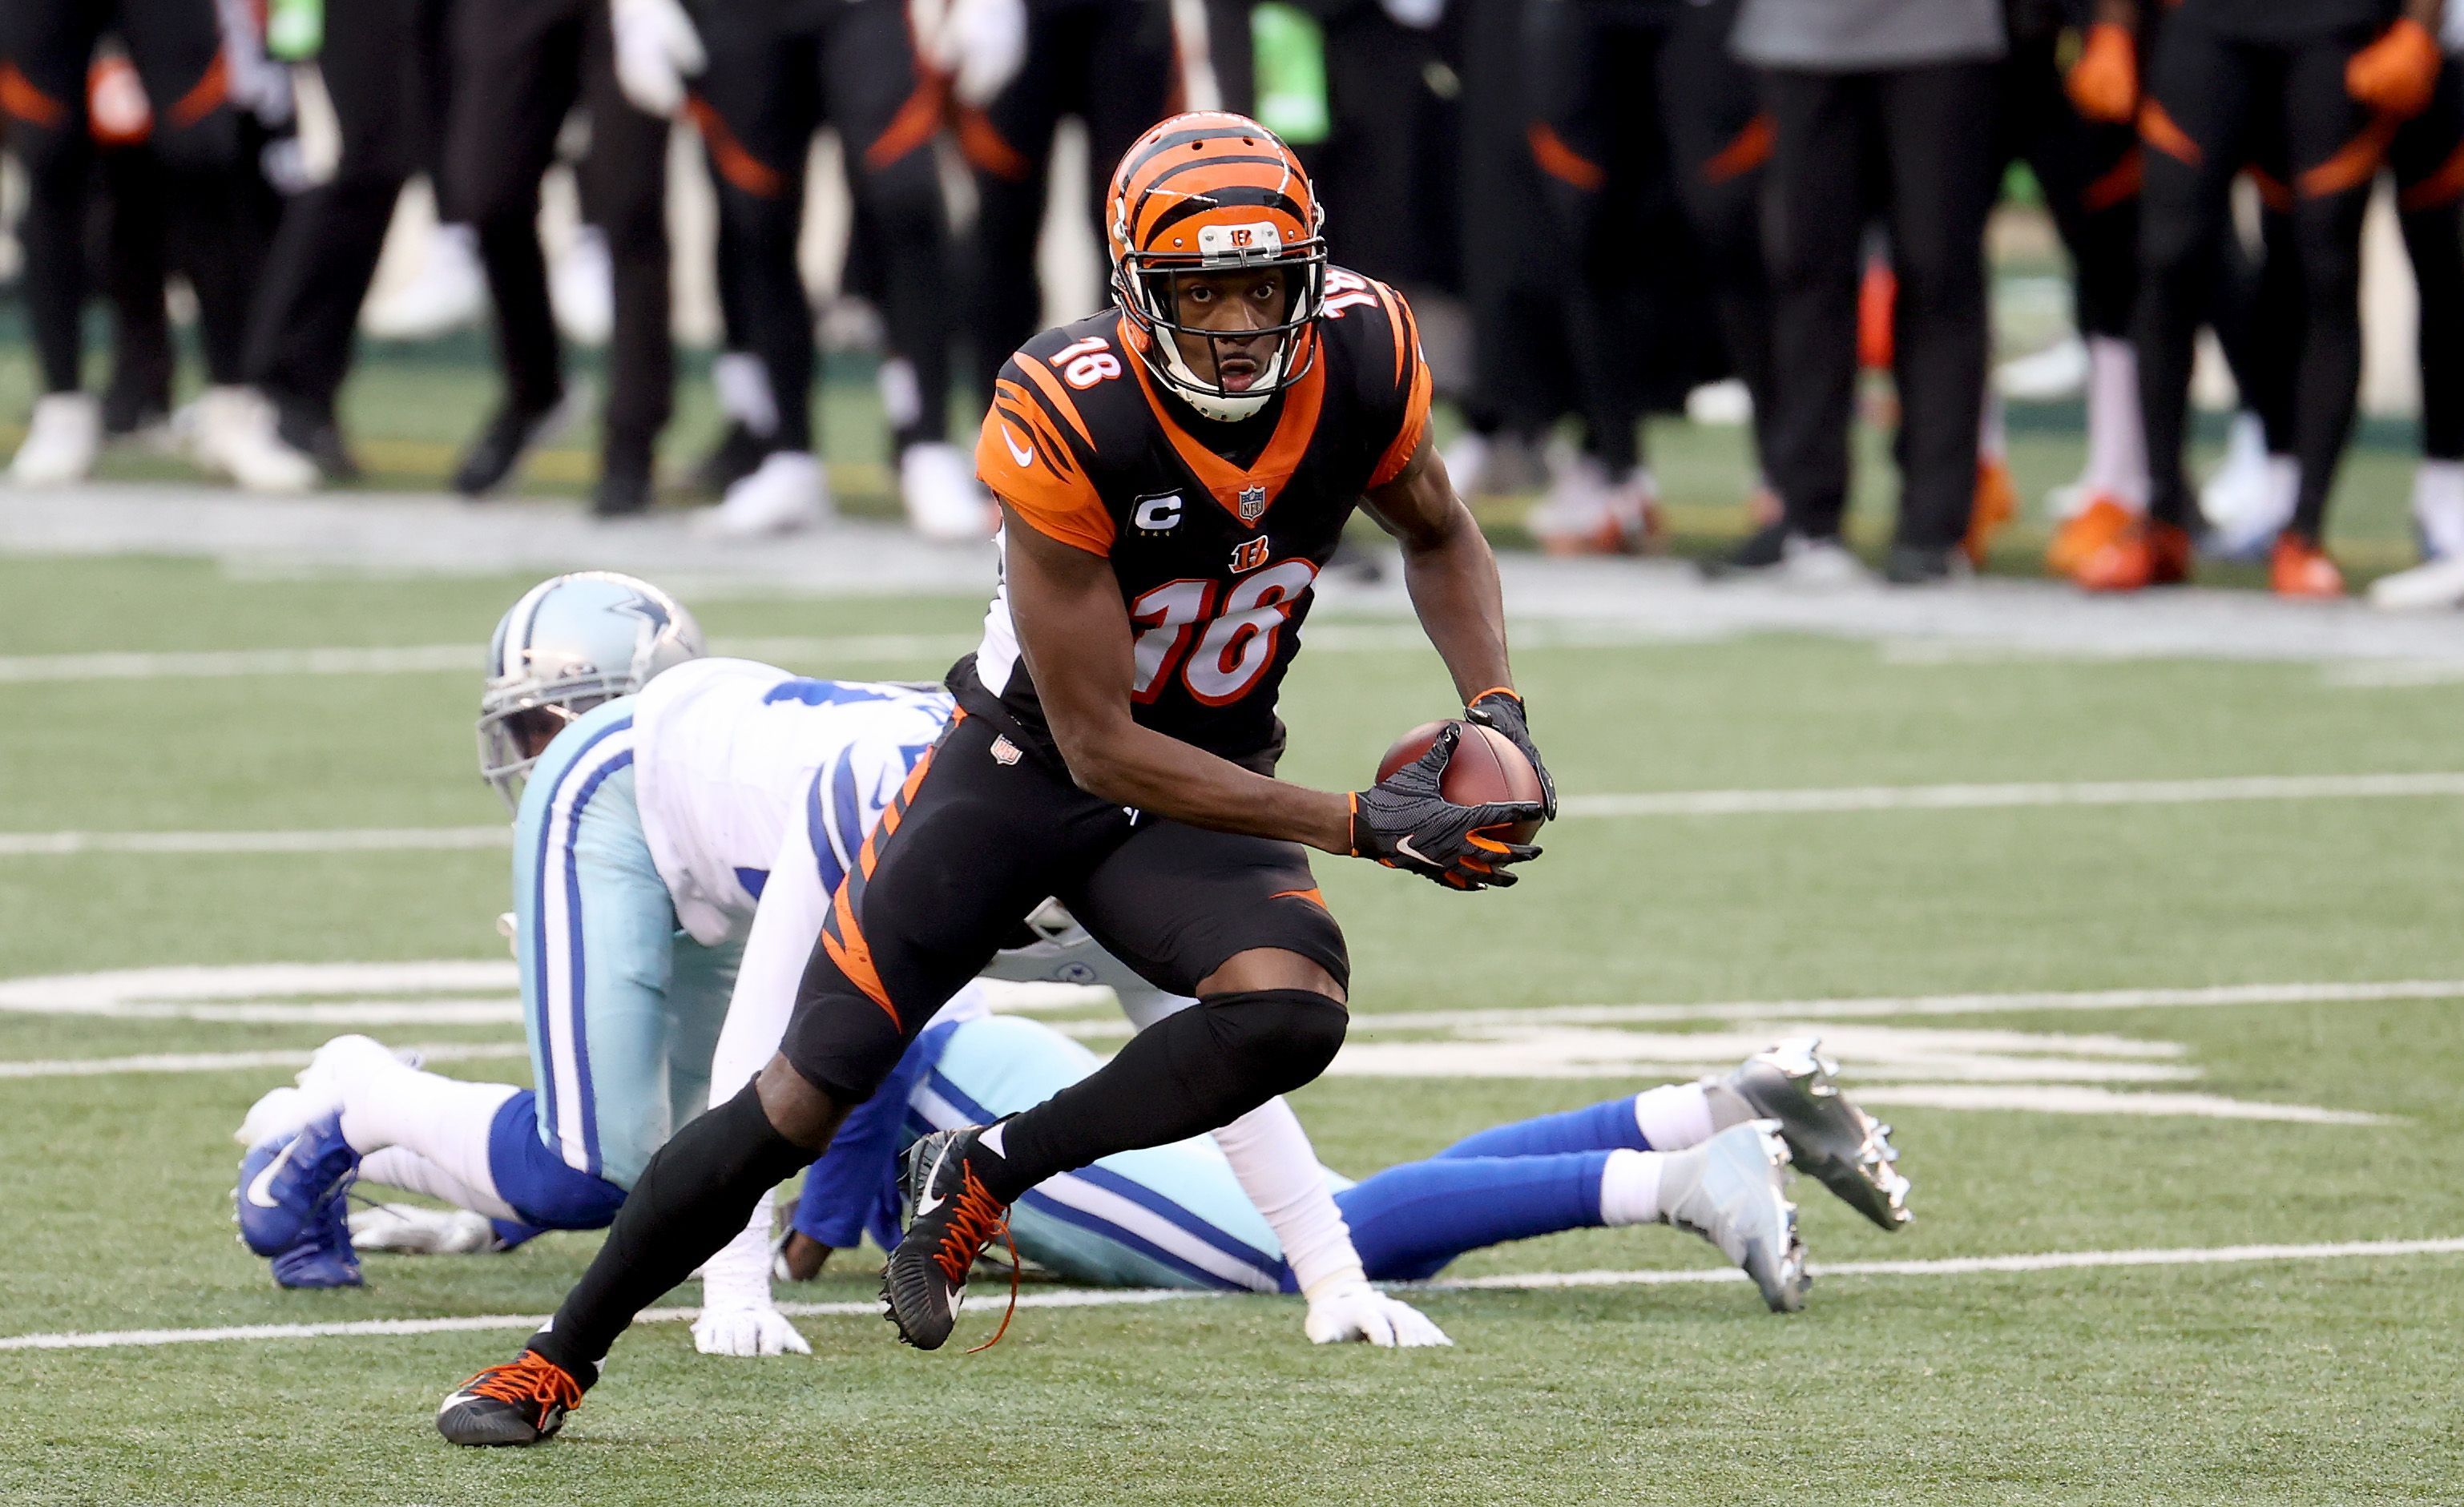 Wide receiver A.J. Green (#18) of the Cincinnati Bengals catches a pass in the game against the Dallas Cowboys at Paul Brown Stadium in Cincinnati, Ohio, December 13, 2020. /CFP